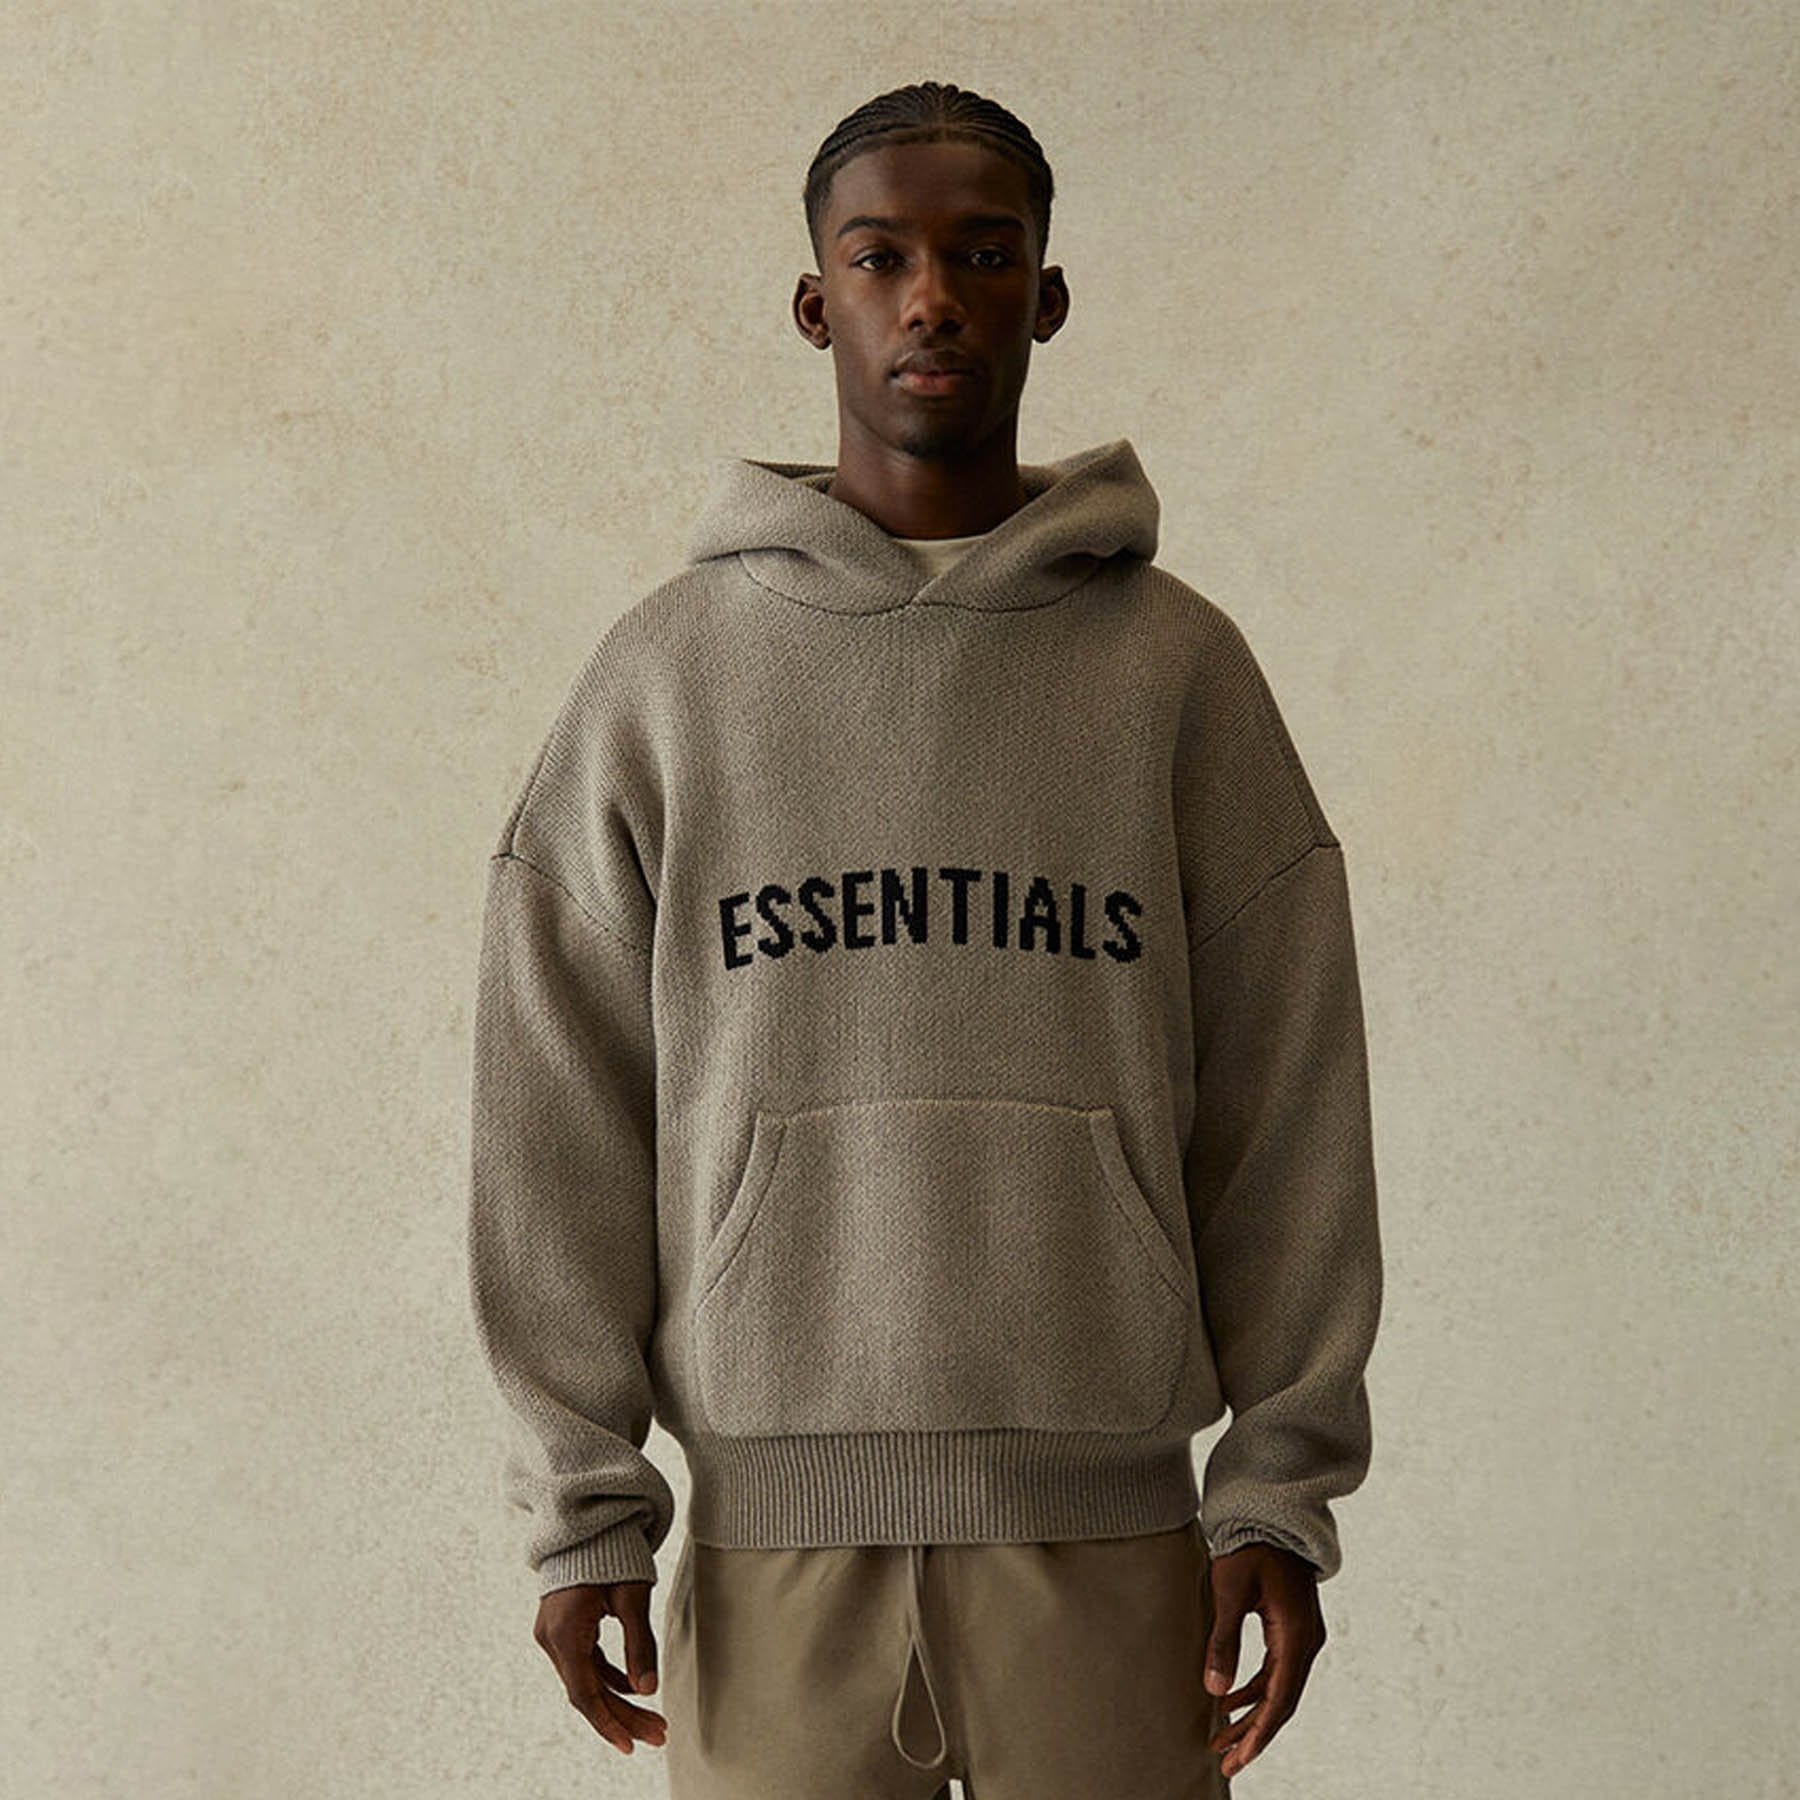 FEAR OF GOD ESSENTIALS Knit Pullover Hoodie Dark Heather Oatmeal ...